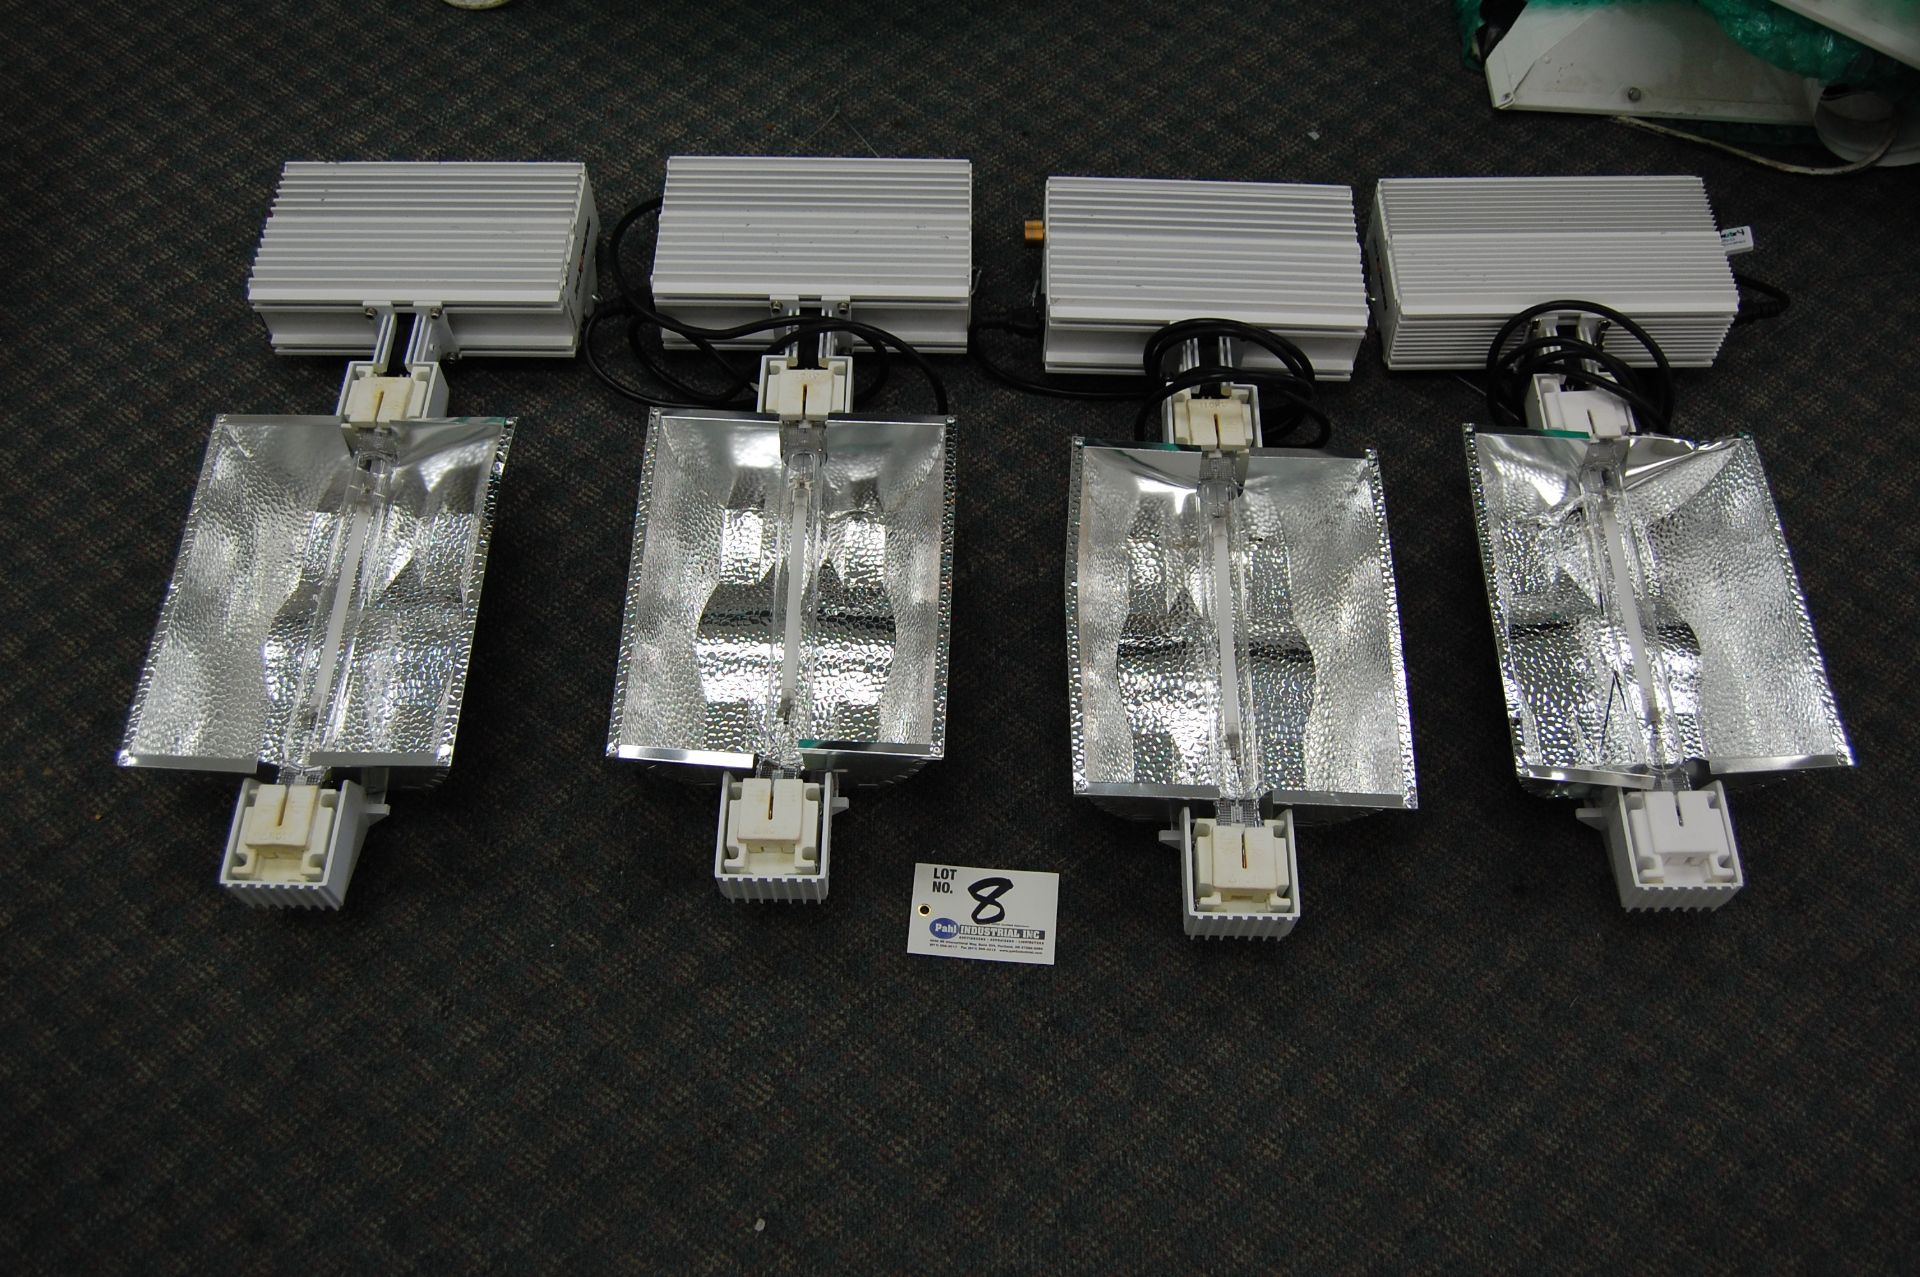 4 Nanolux DE Double-Ended Digital Electronic Ballast Fixtures 1000W with 1000W Lamp